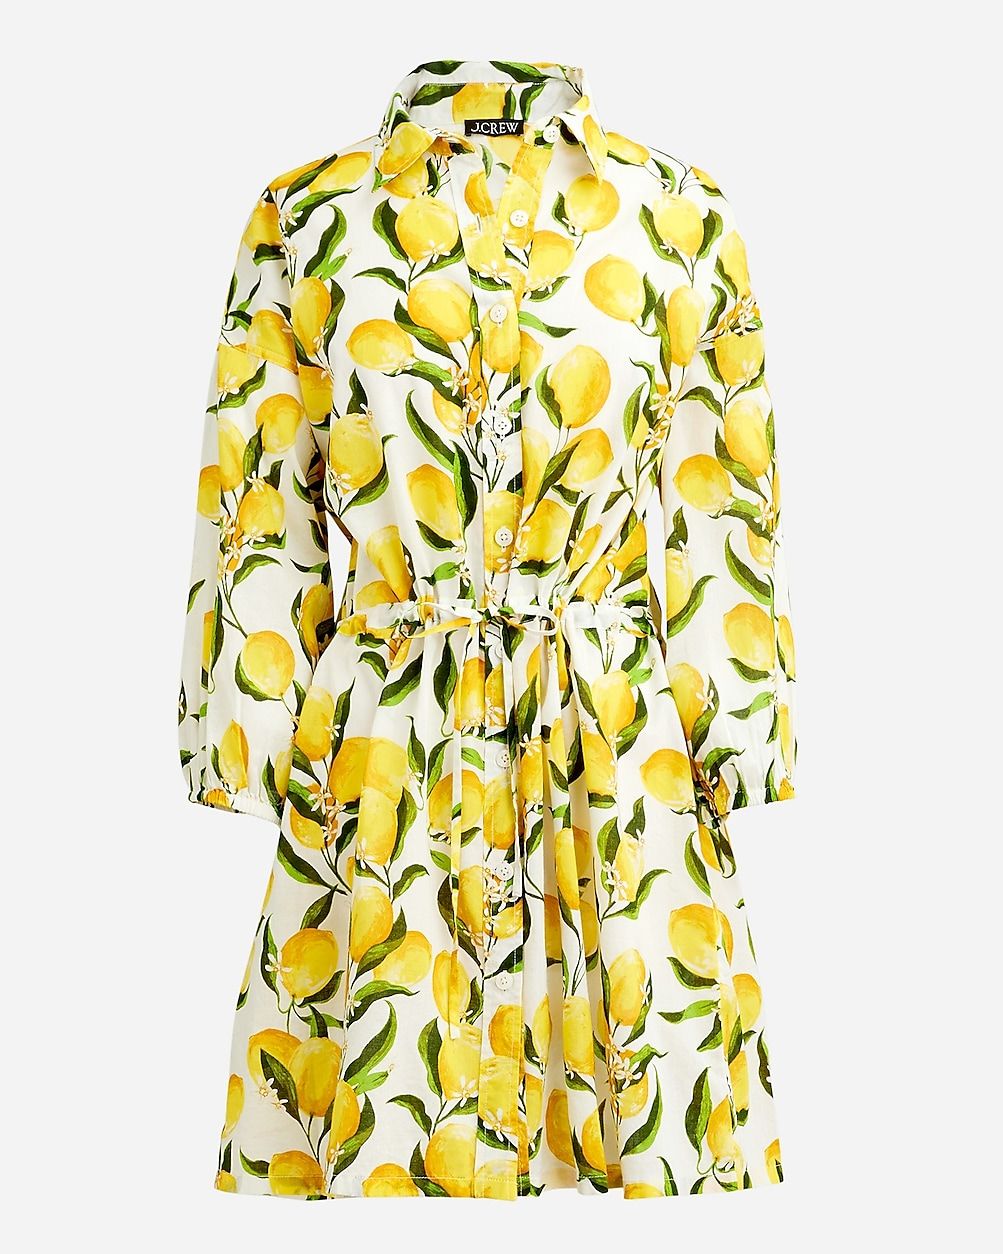 Cinched shirtdress in limoncello cotton voile | J.Crew US